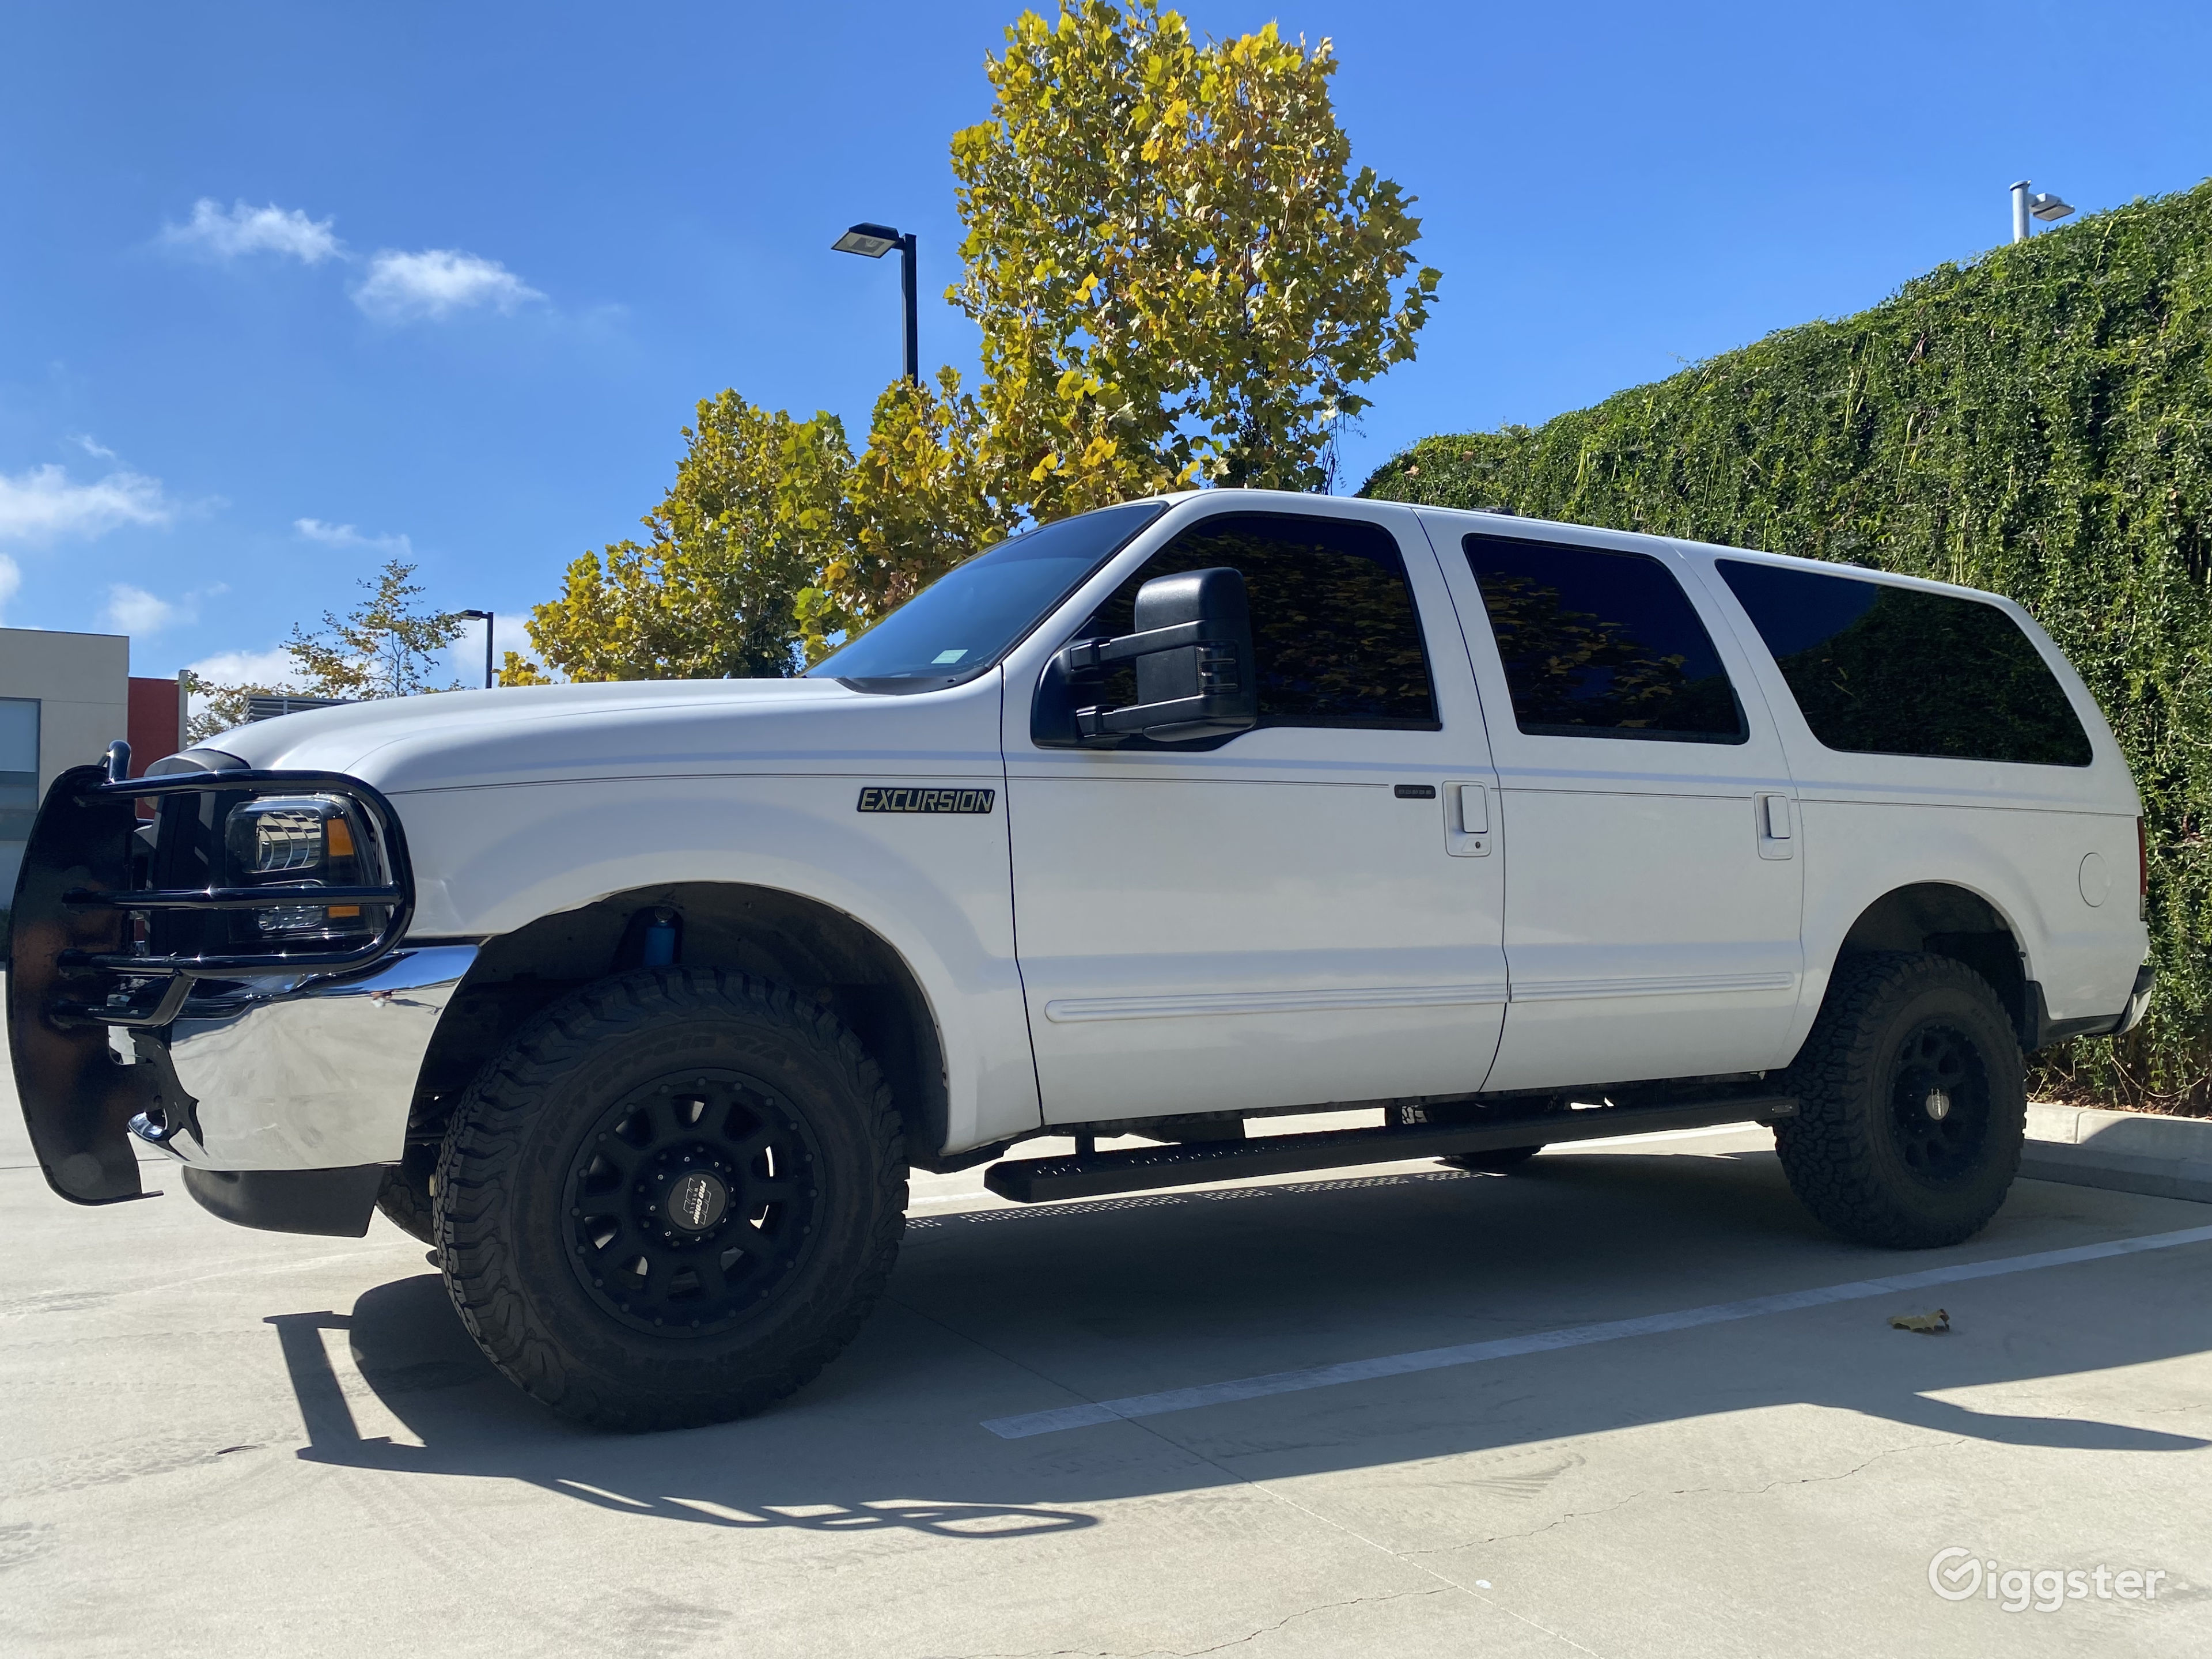 Ford Excursion XLT Off-Road SUV Truck | Rent this location on Giggster